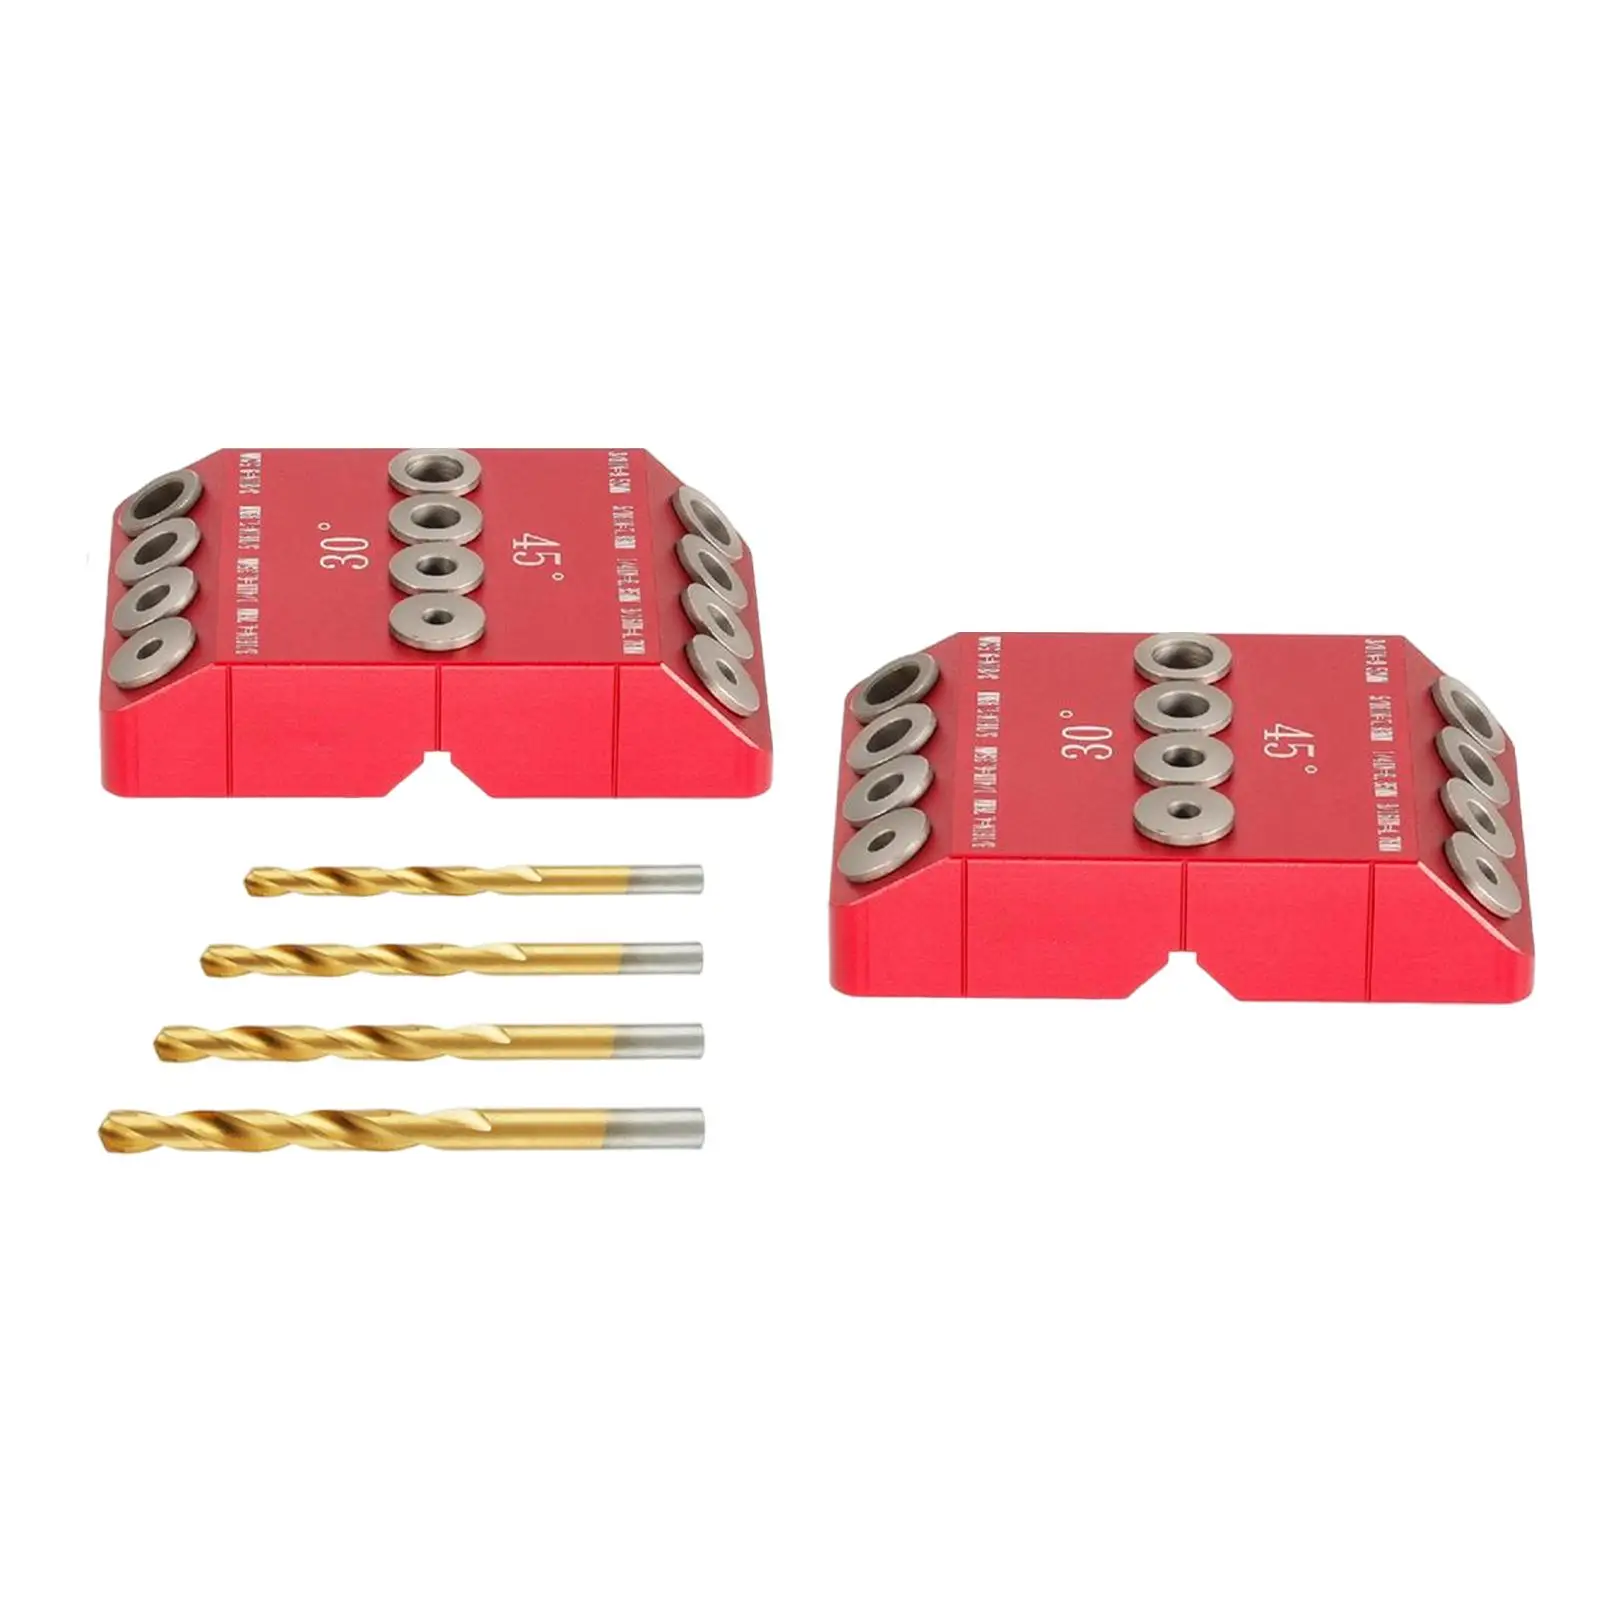 Drill Guide Drill Jig Woodworking 30 45 90 Degree Angle Drill Bit Hole Doweling Jig Locator Drilling Kit for Metal Handrail